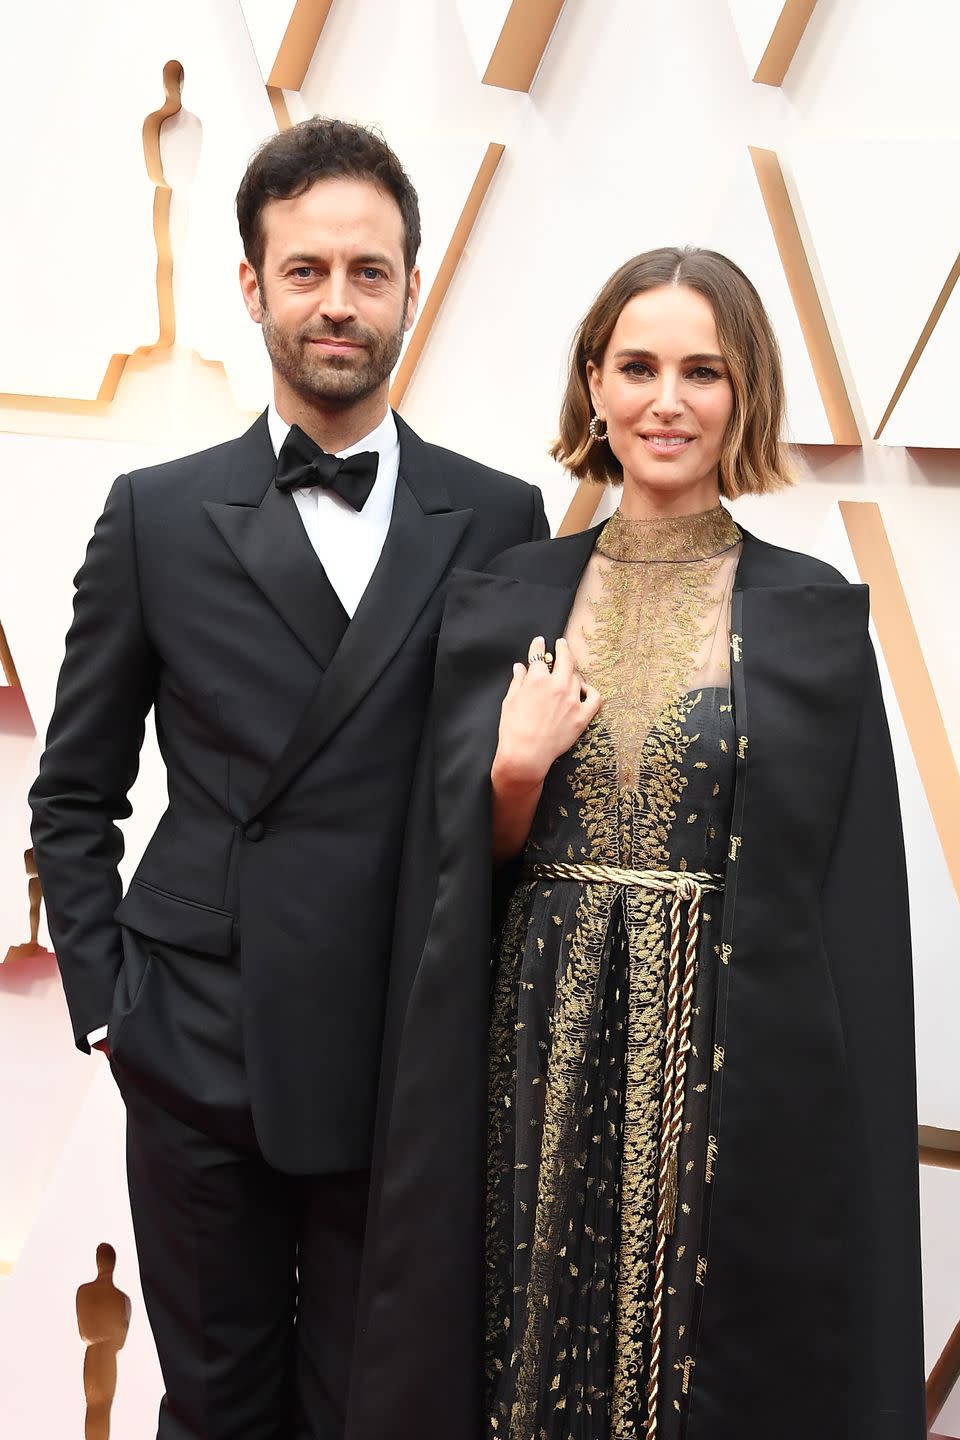 hollywood, california february 09 benjamin millepied and natalie portman r attends the 92nd annual academy awards at hollywood and highland on february 09, 2020 in hollywood, california photo by steve granitzwireimage